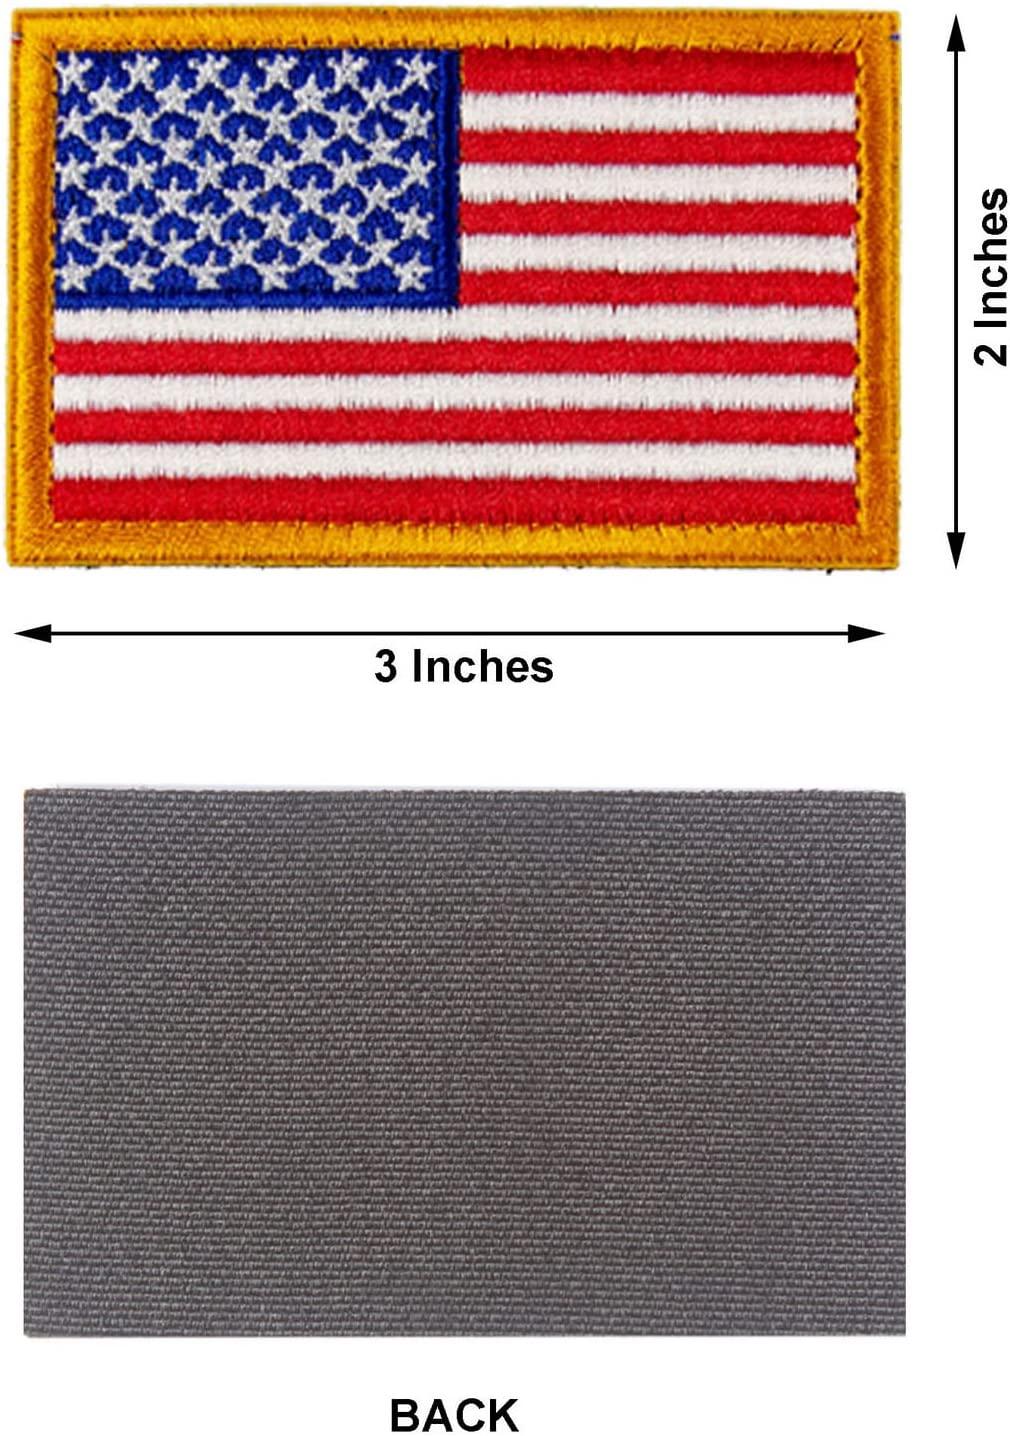 Tactical Patches of USA US American Flag, with Hook and Loop for Backpacks Caps  Hats Jackets Pants, Military Army Uniform Emblems, Size 3x2 Inches Gold  Border